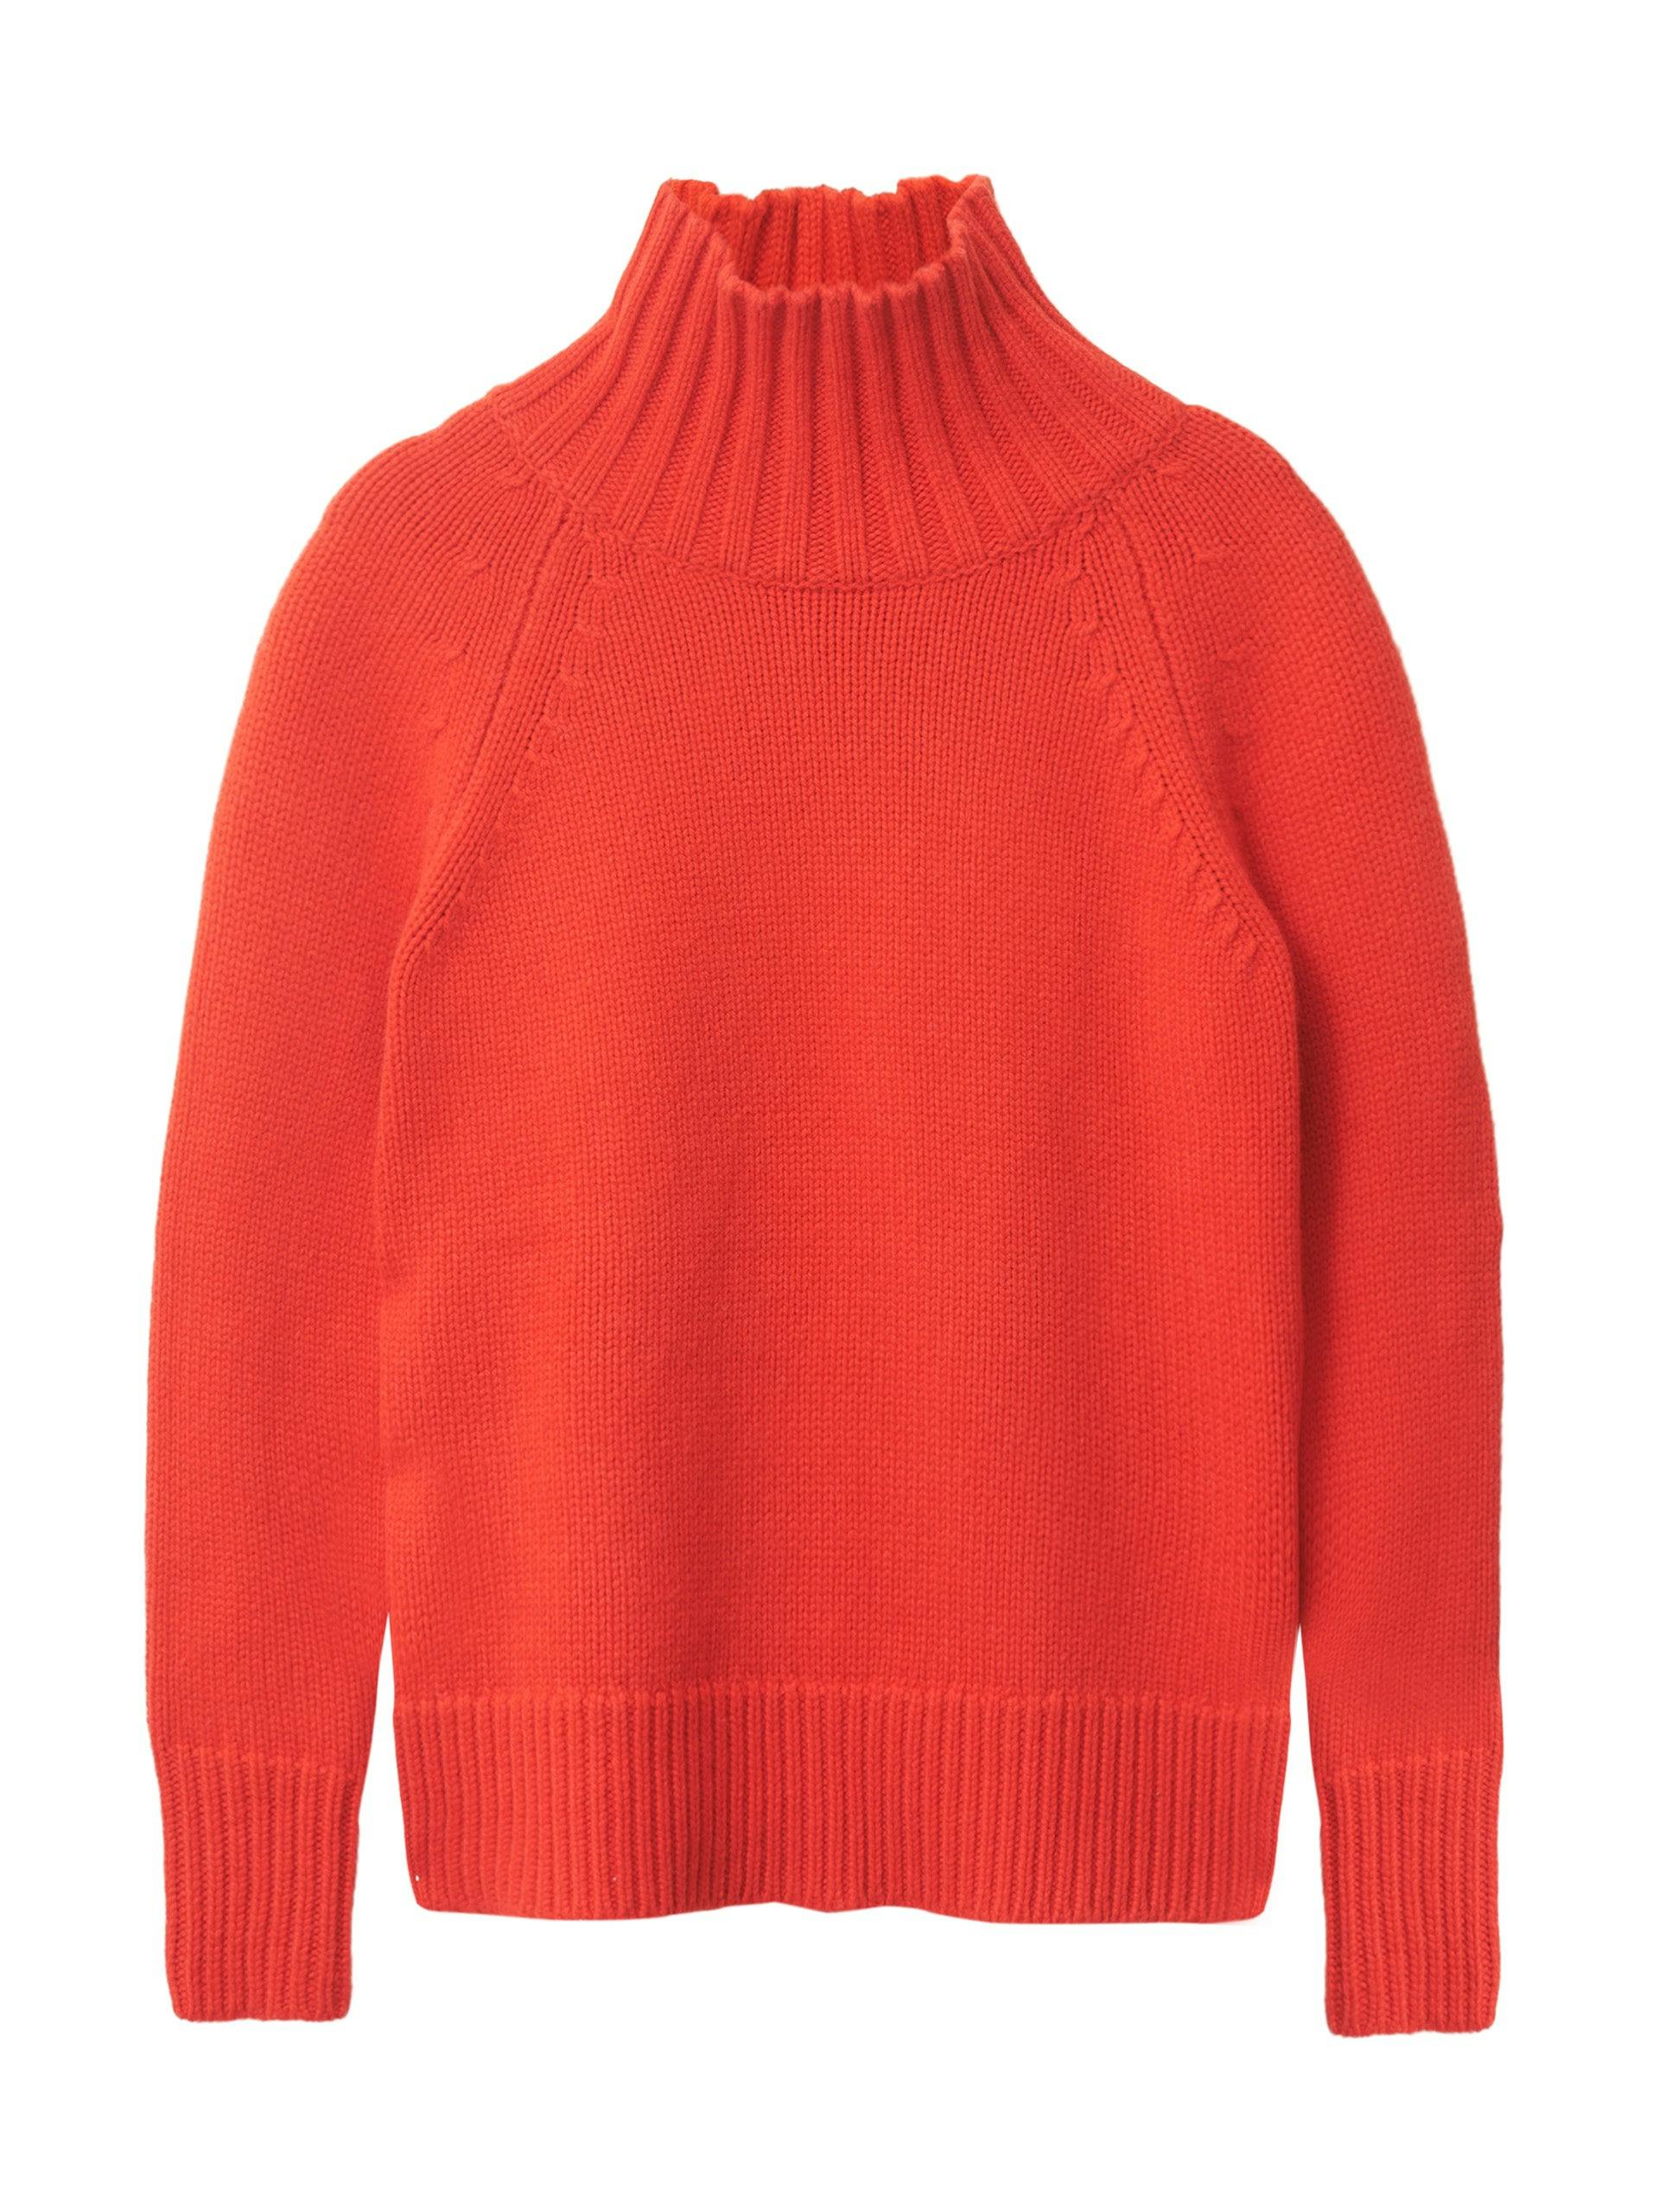 The Authentic funnel knit in poppy red